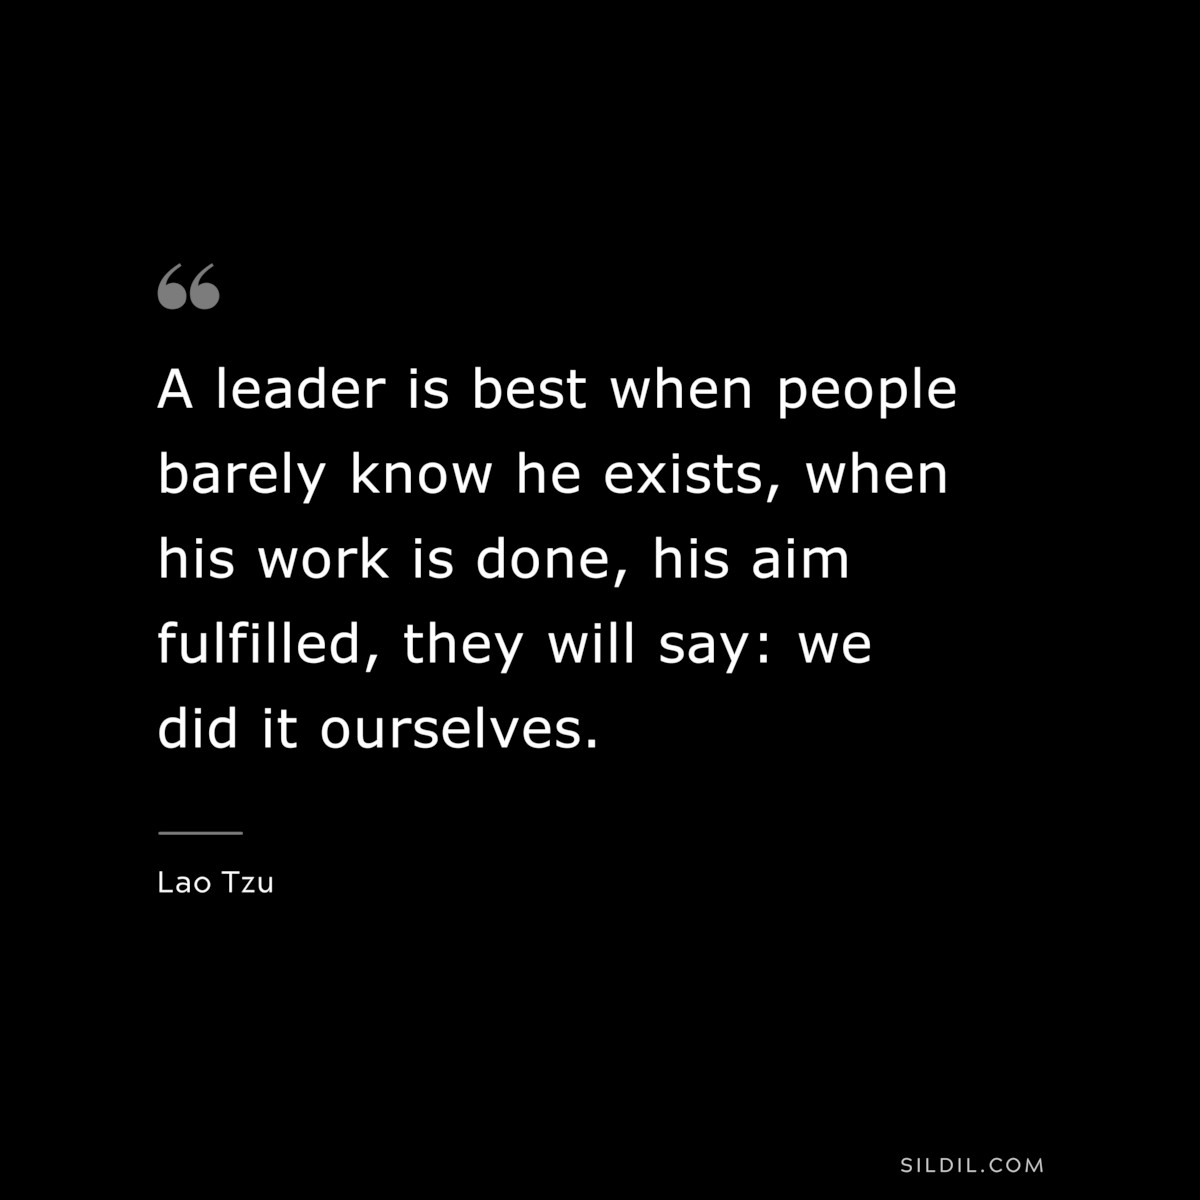 A leader is best when people barely know he exists, when his work is done, his aim fulfilled, they will say: we did it ourselves. ― Lao Tzu